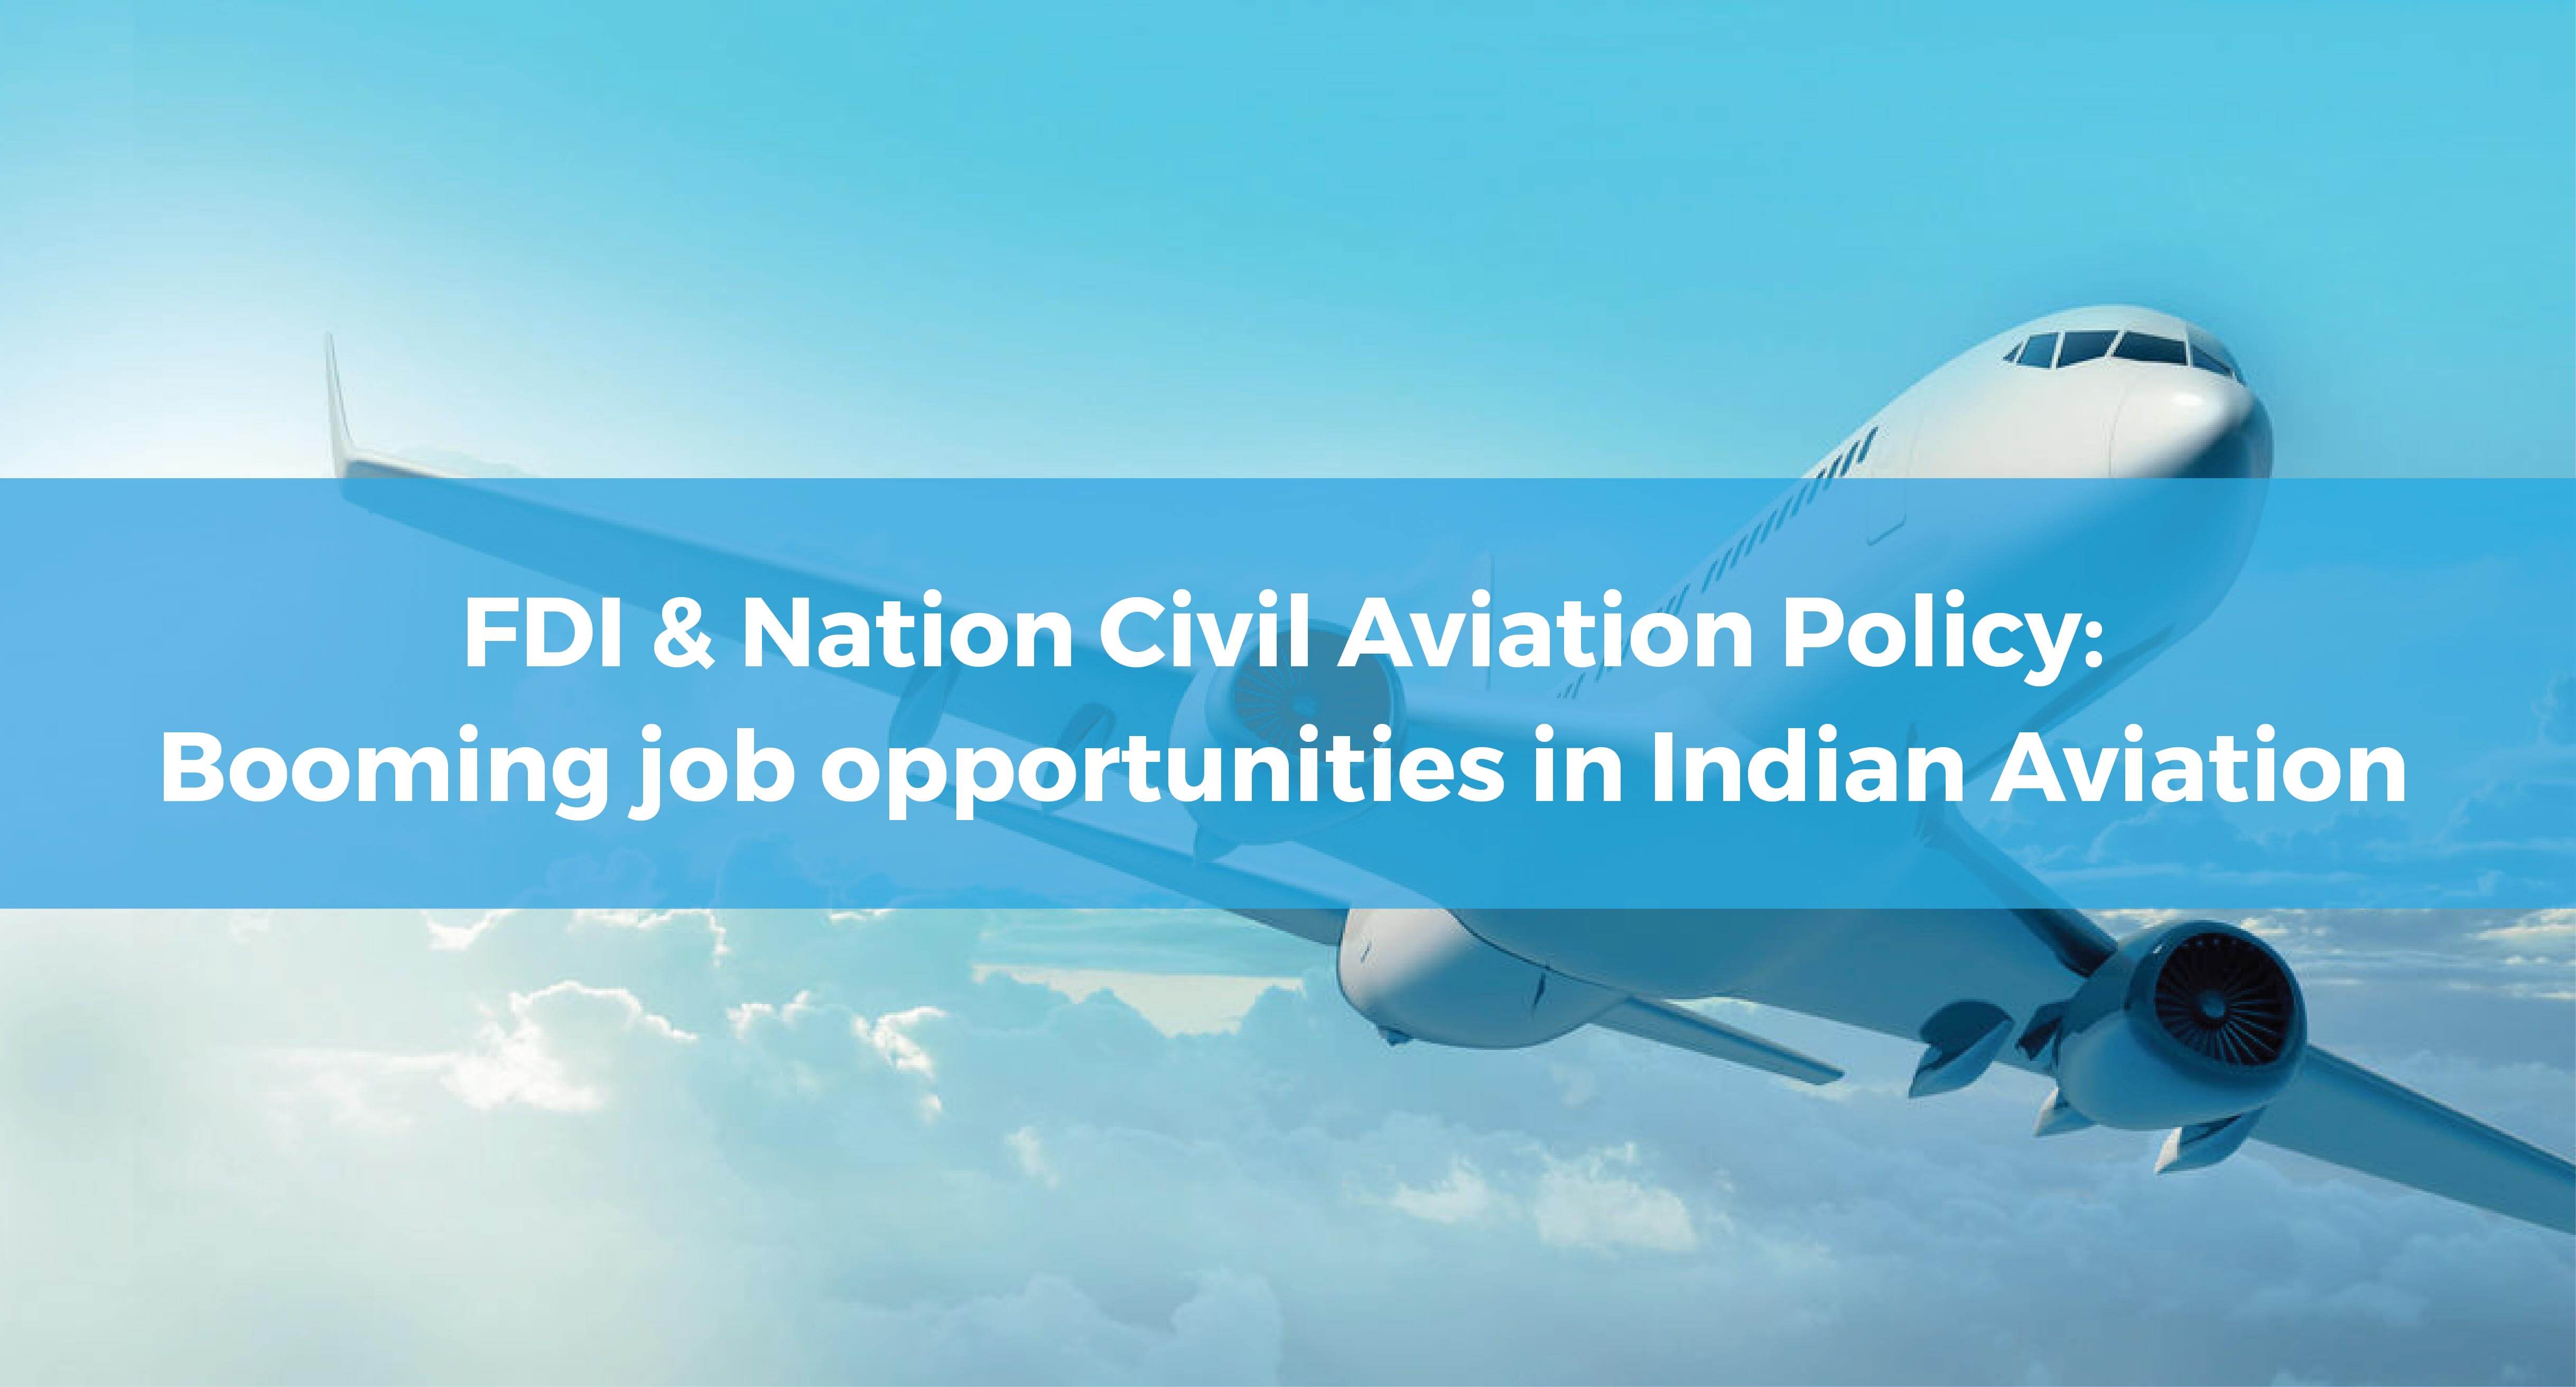 FDI & Nation Civil Aviation Policy: Booming Job Opportunities In Indian Aviation - Transglobe Academy